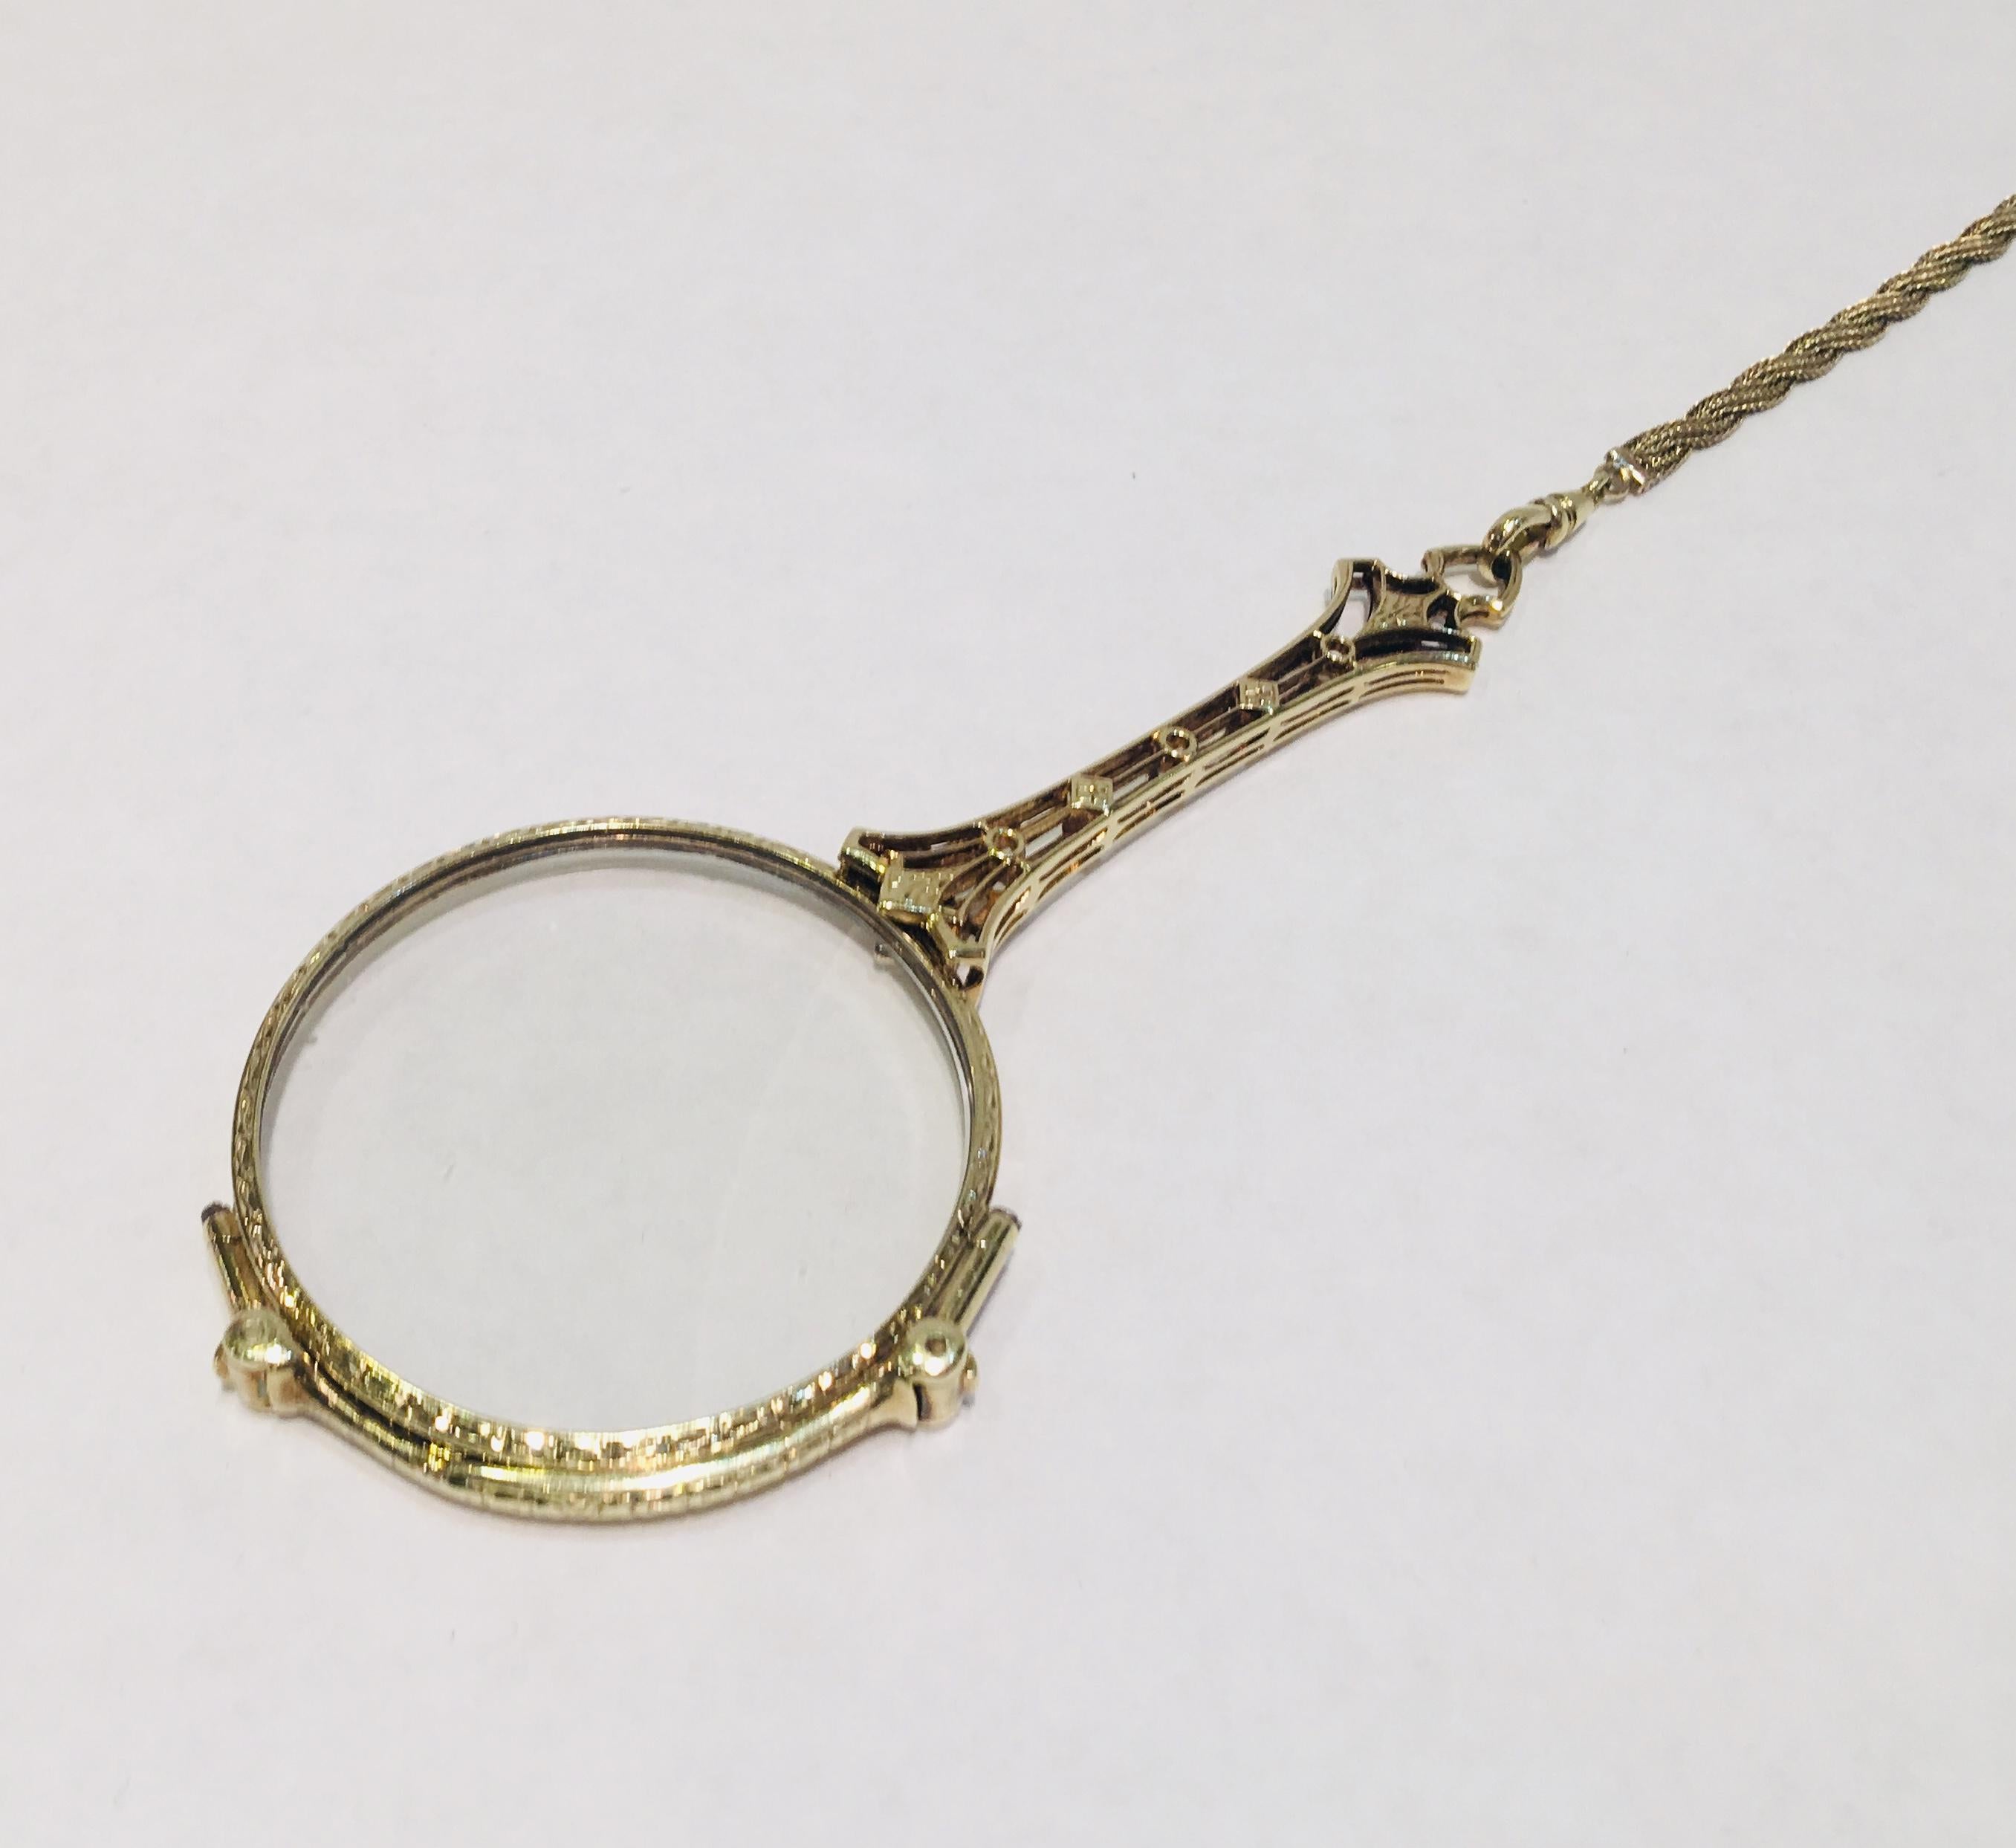 14 Karat Lorgnette Folding Eyeglasses with Gold, Diamond and Seed Pearls Lariat For Sale 5